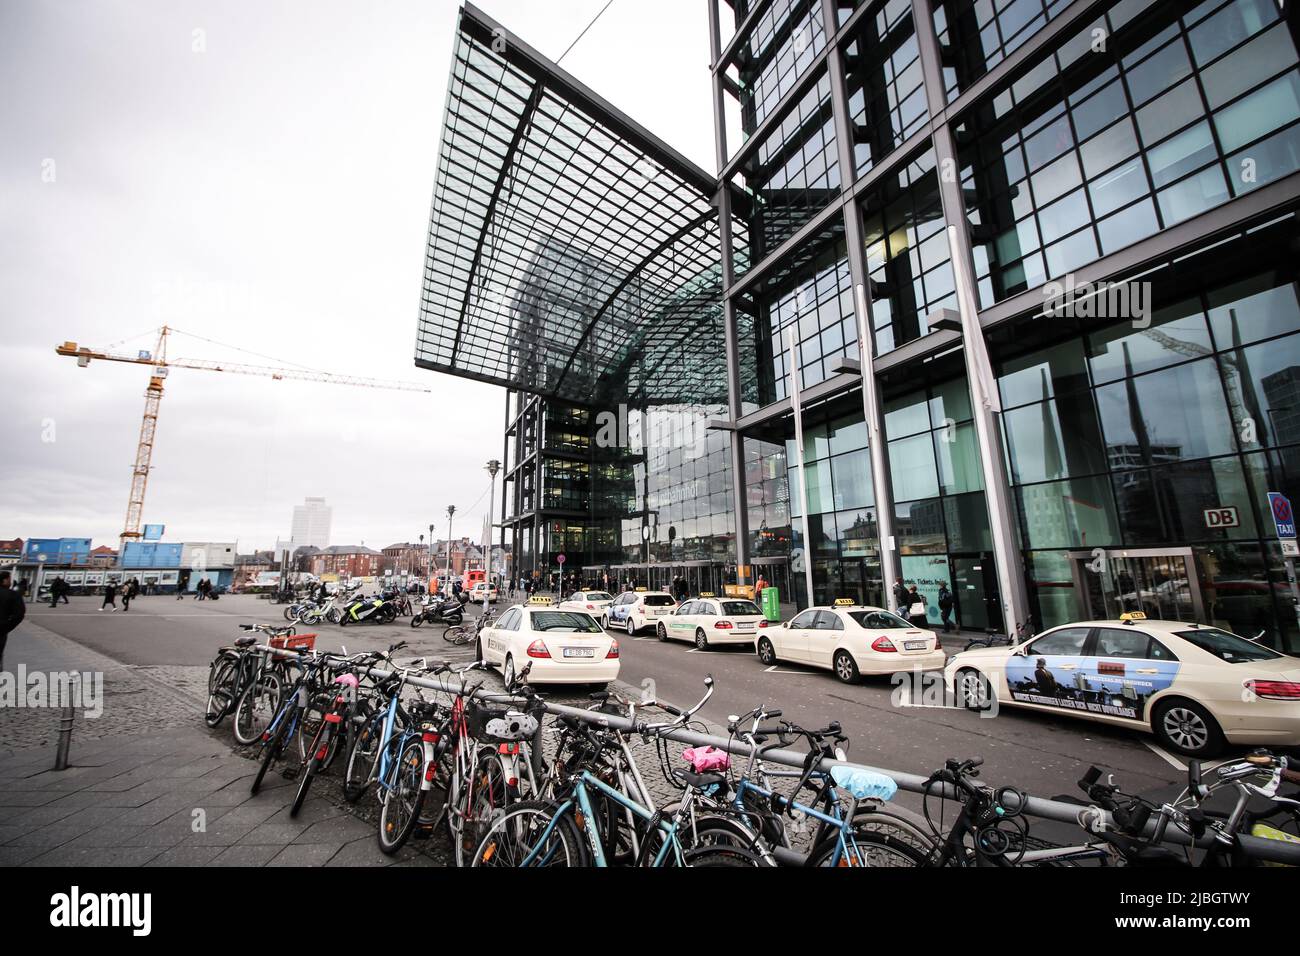 Main entrance of Berlin Hauptbahnhof station. Hauptbahnhof is the main railway station in Berlin. There are taxes and parked bicycles in image. Stock Photo